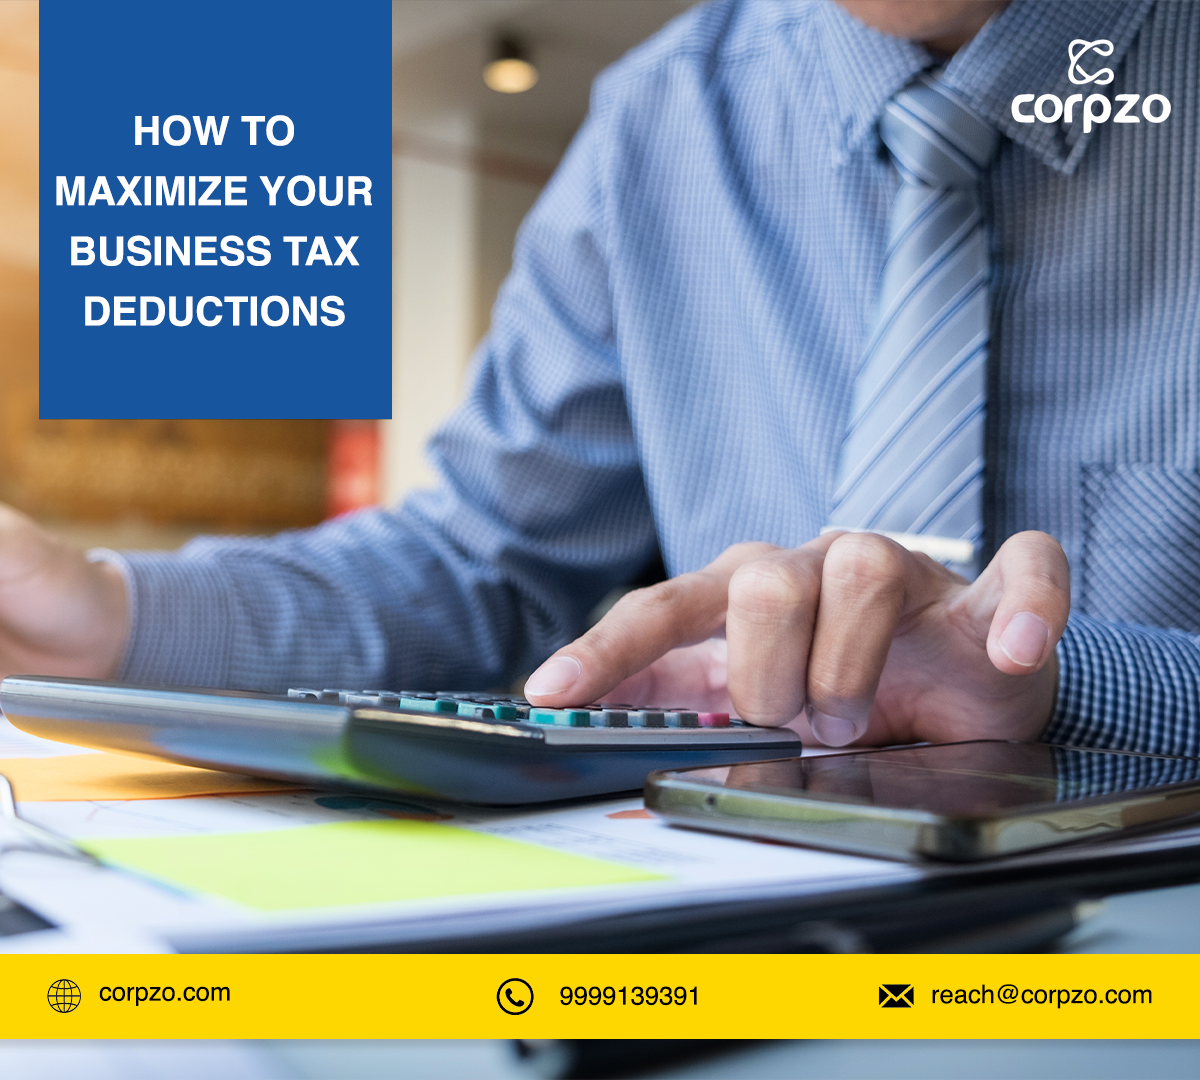 How to Maximize Your Business Tax Deductions